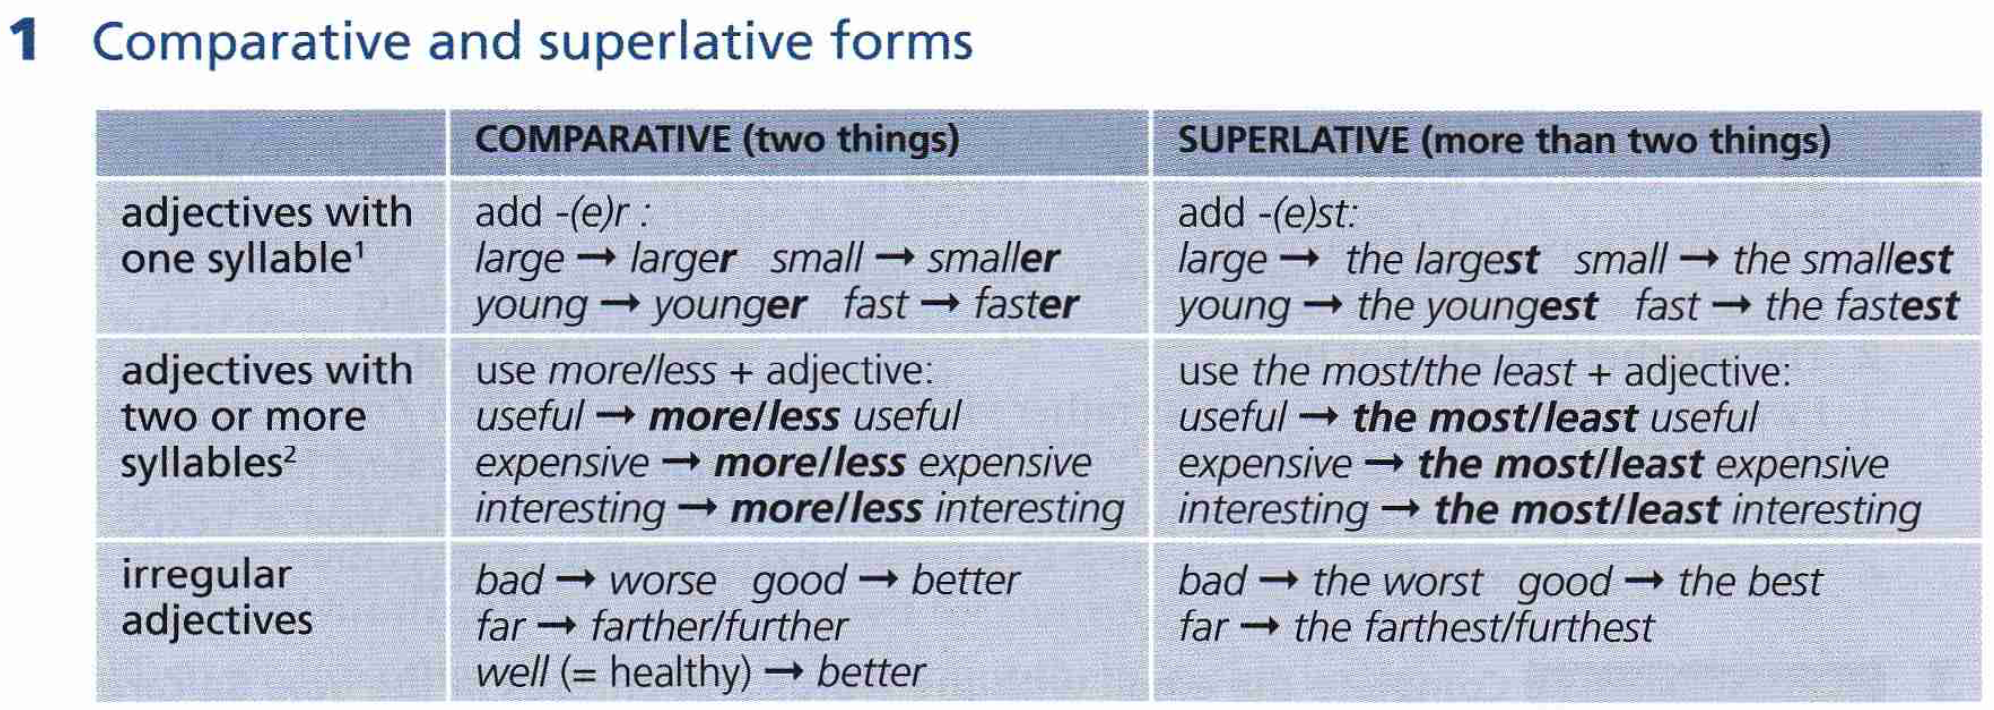 Get comparative. Comparatives and Superlatives правило. Таблица Comparative and Superlative. Comparative and Superlative adjectives правило. Degrees of Comparison of adjectives таблица.